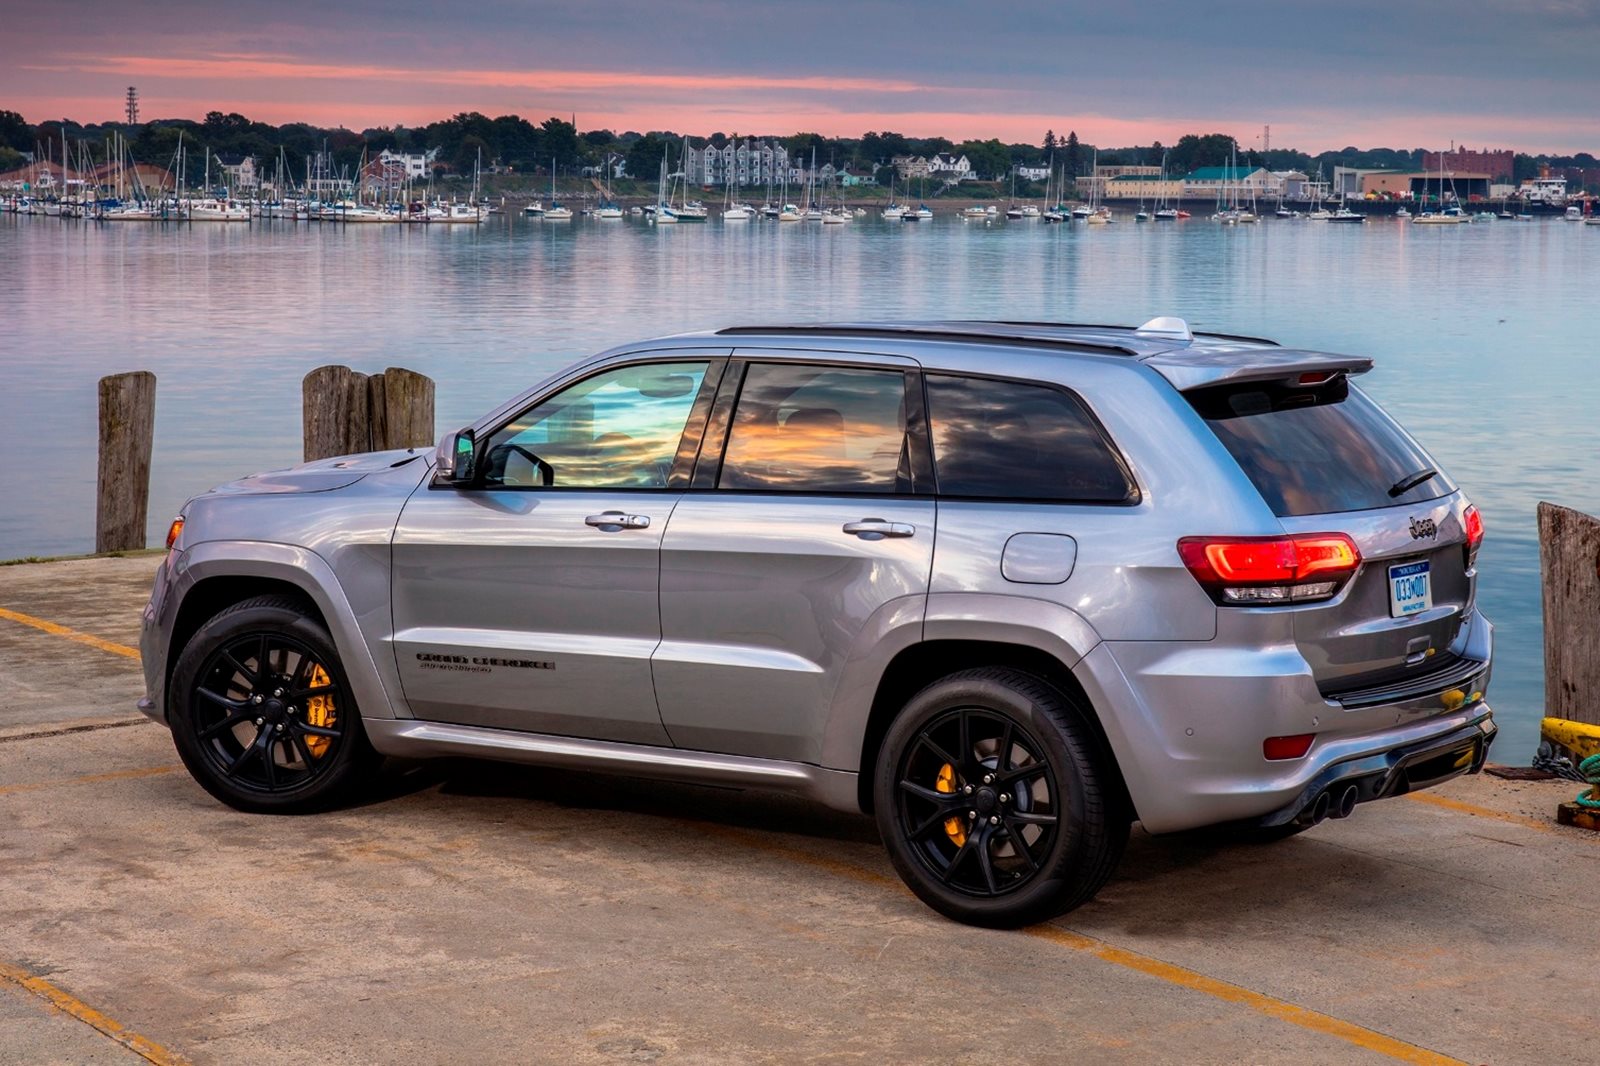 Review of the 2018 Jeep Grand Cherokee Trackhawk | Car Reviews | Auto123